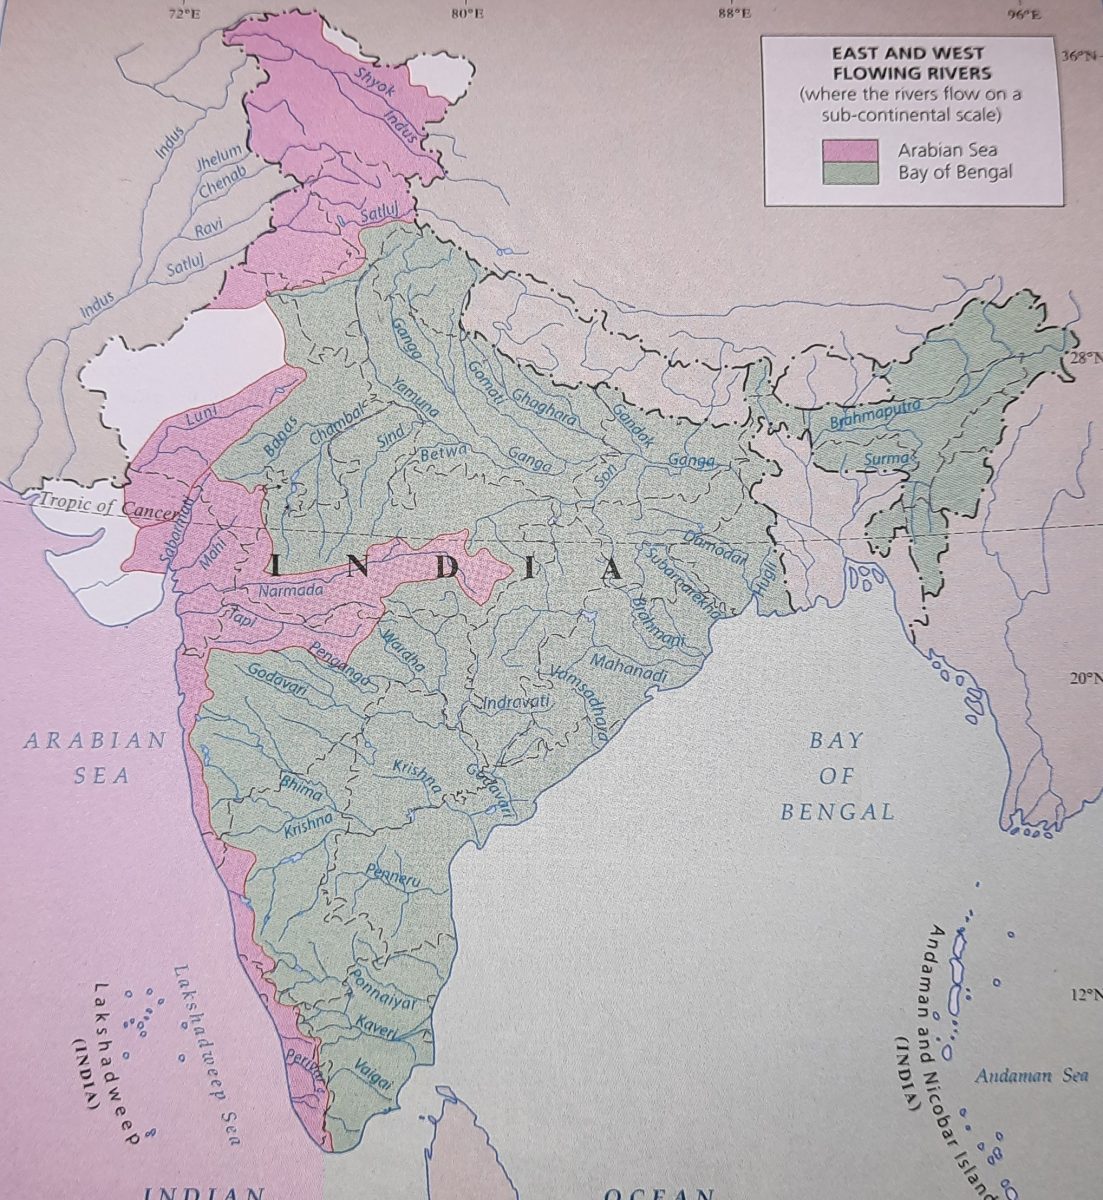 east and west flowing rivers in india map